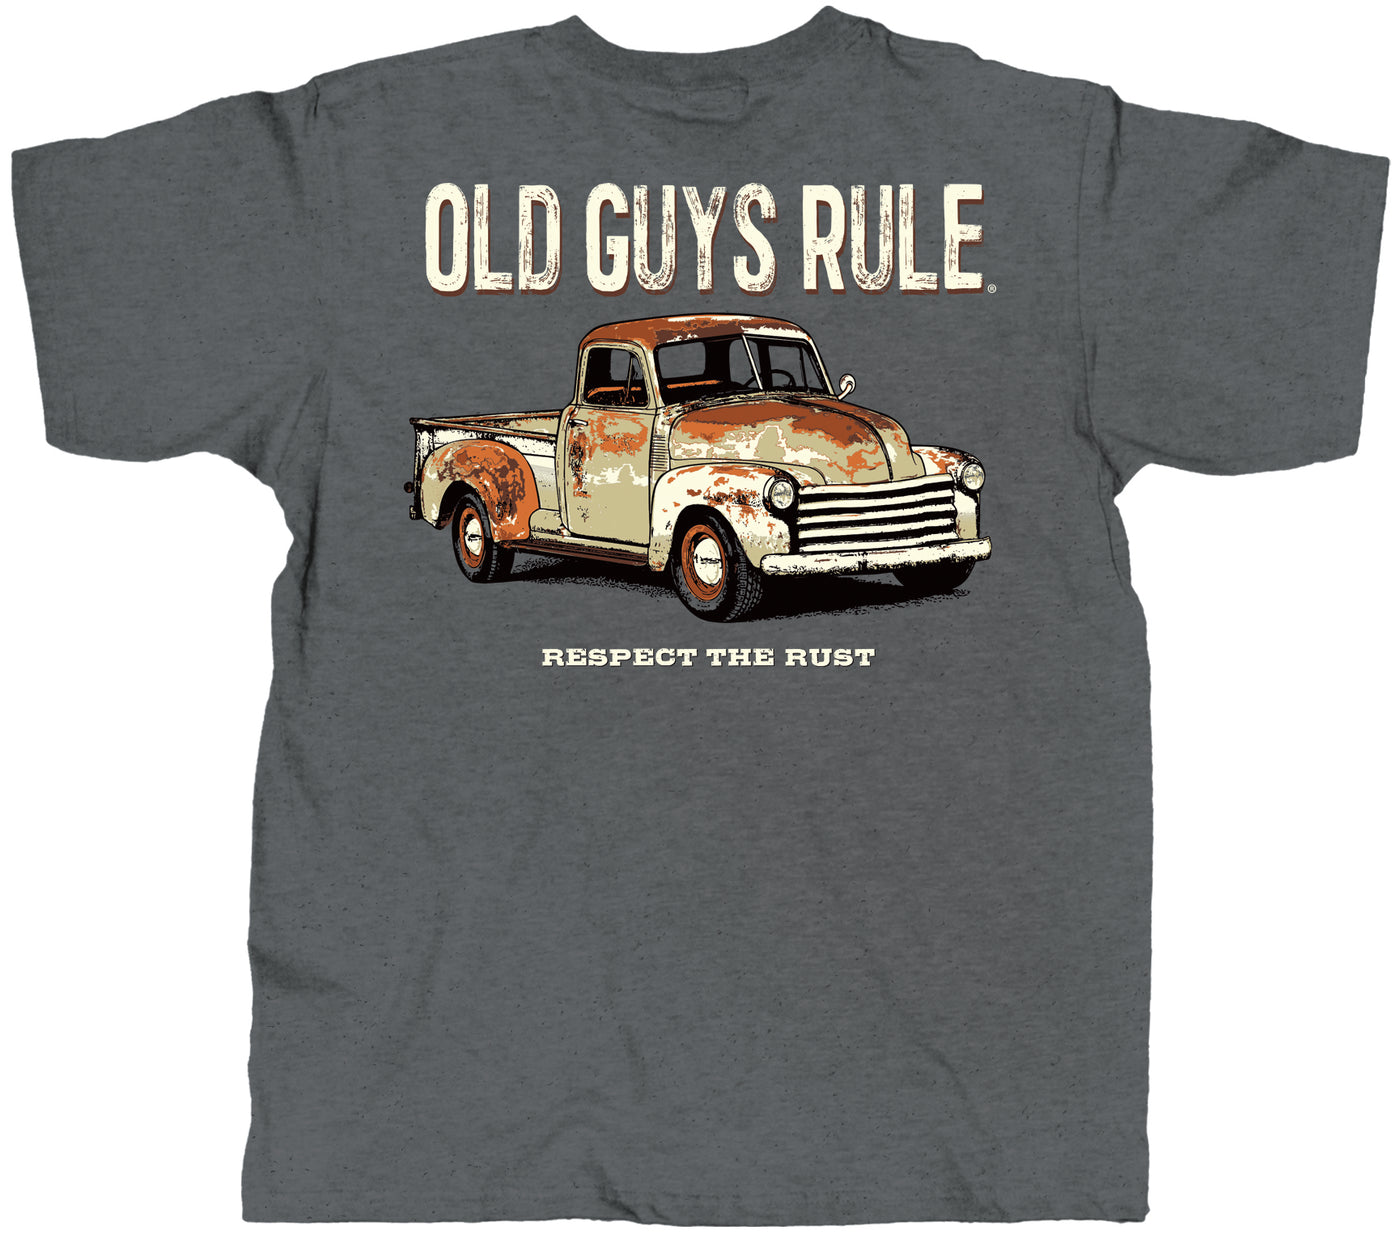 Nuthin' is more cool than a Old Guys Rule Rusty ol Truck T shirt. Our unique T-shirt design is NOT for the man who has given up on life. On the contrary, it’s the man that keeps looking better and better with age and challenges everything that life’s throwing at him! Available online and in our retail shop in Smyrna, TN.